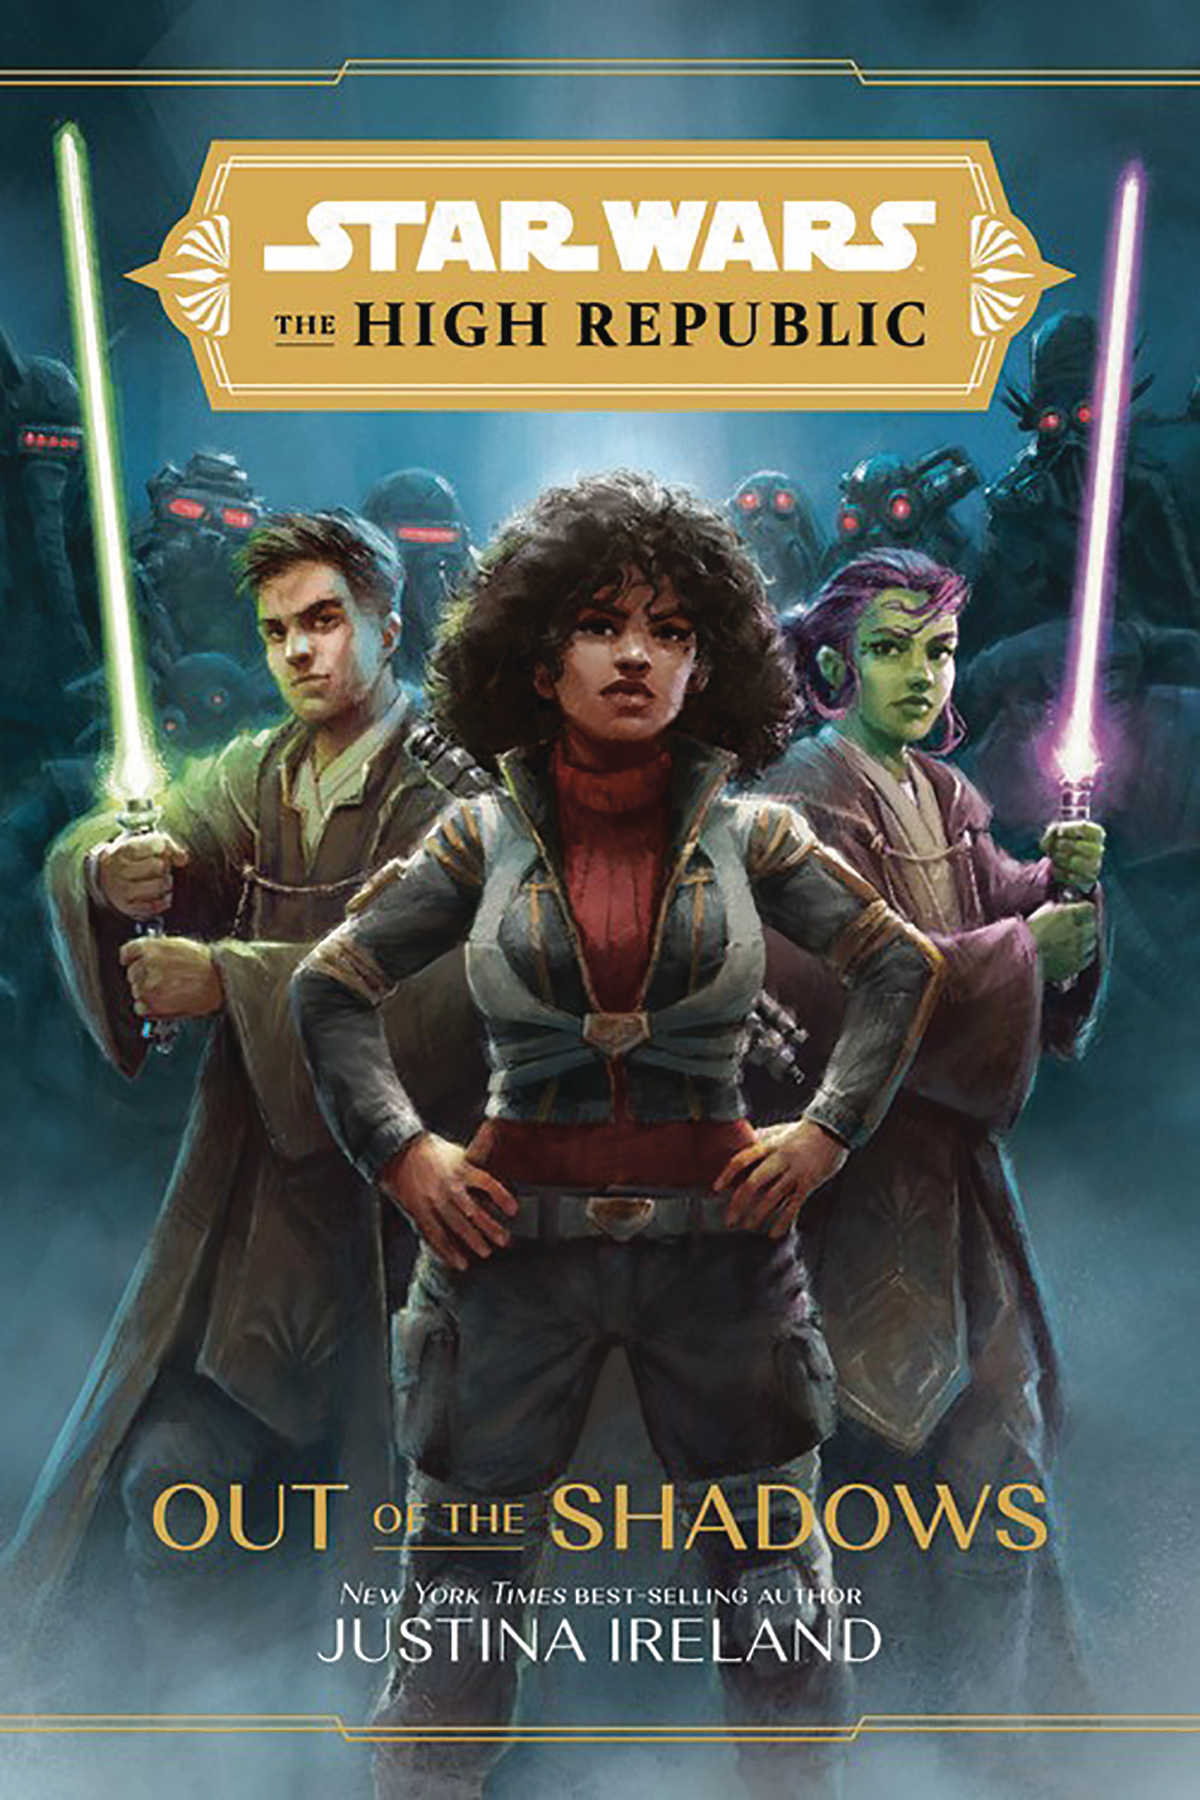 Star Wars the High Republic Ya Hardcover Novel #3 Out of Shadows